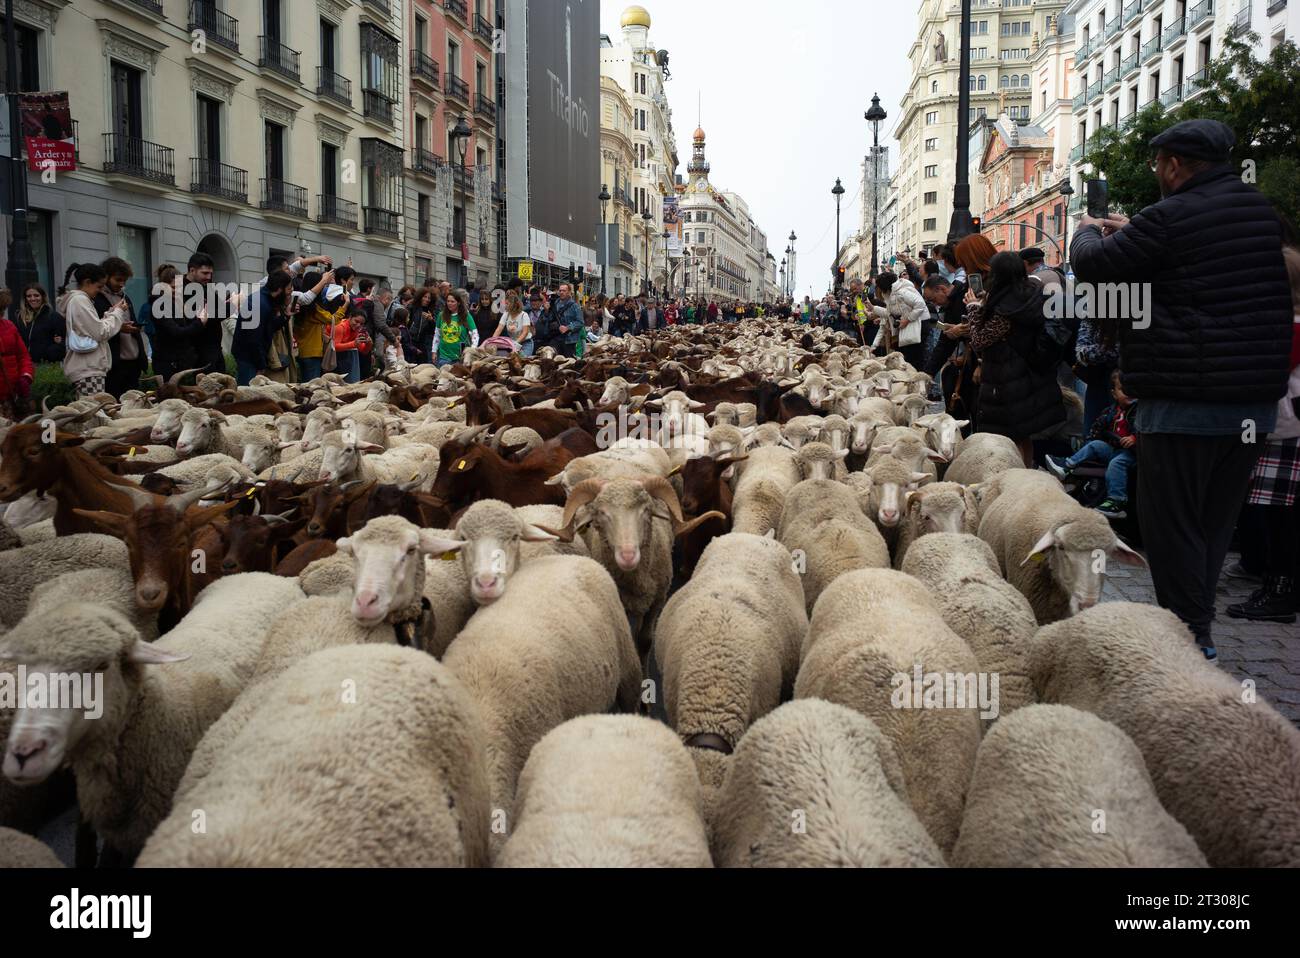 The flock of sheep and goats, accompanied by shepherds, pass through the streets of central Madrid during Transhumance, celebrated annually. October 2 Stock Photo